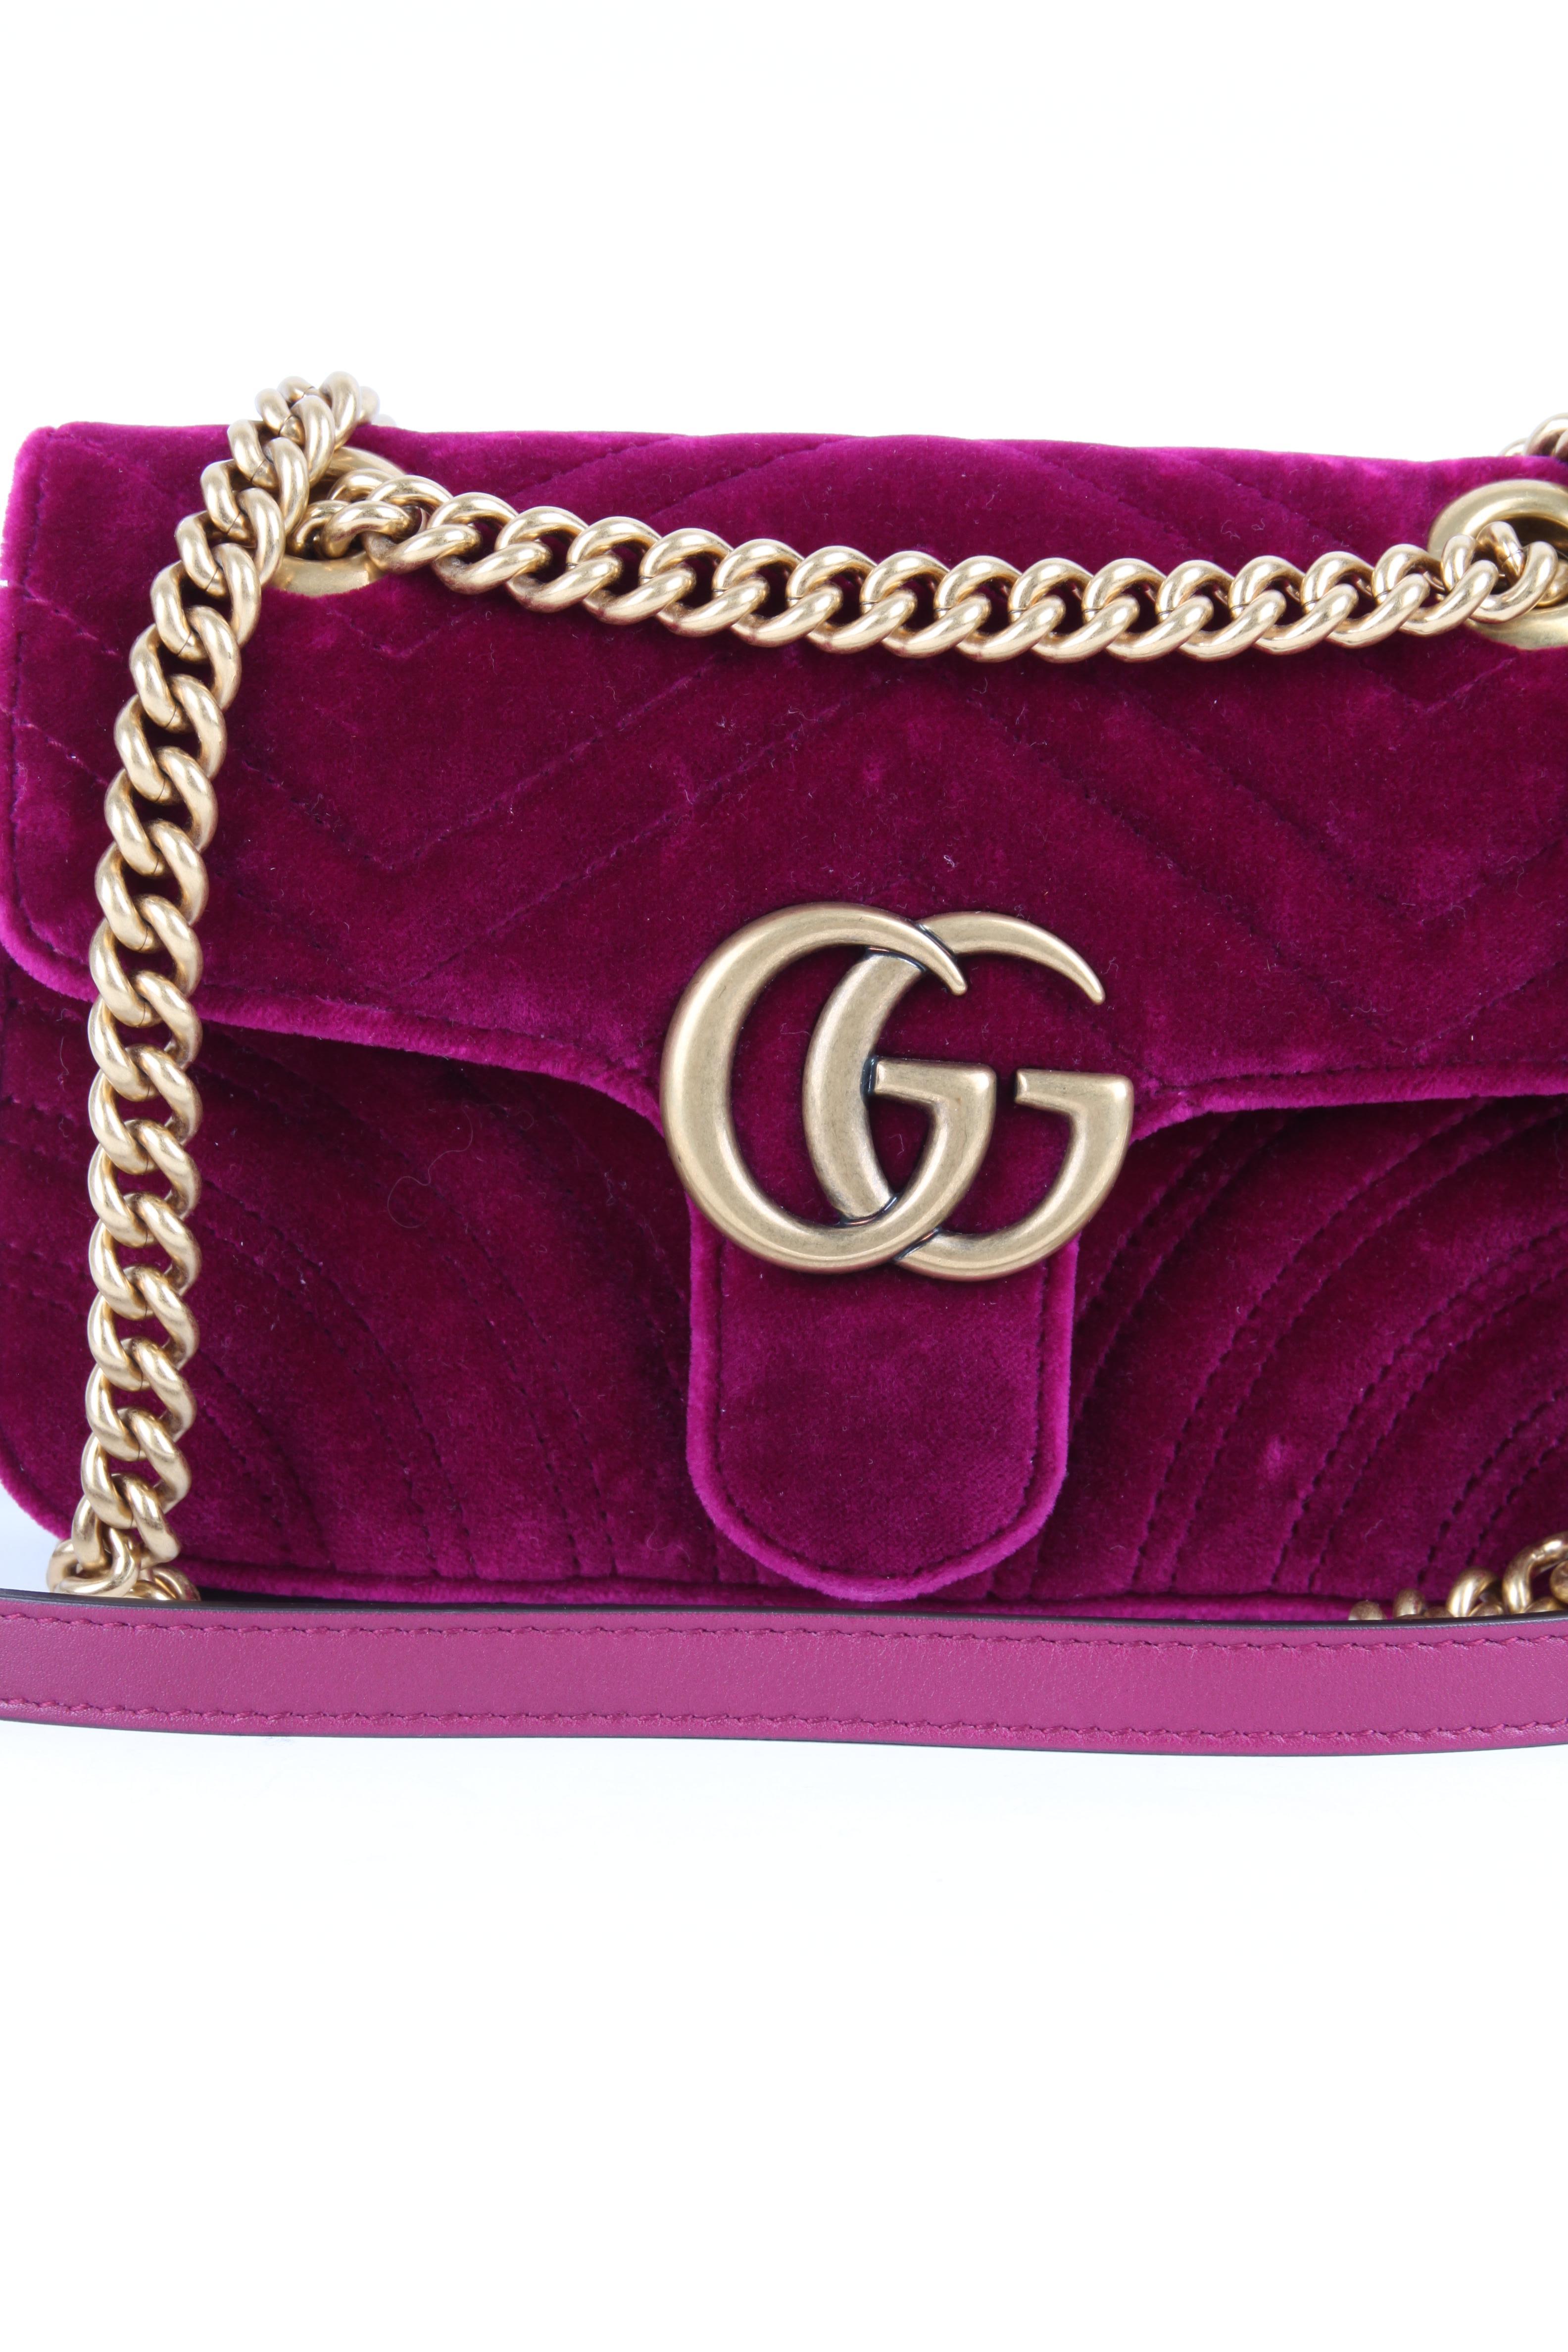 
This popular Gucci GG Velvet Marmont shoulder bag is made in Italy.

The leather has been quilted in different patterns, on the back you even find a heart. Front closure, a large GG logo on top of it. Hardware in gunmetal gold. The shoulder strap